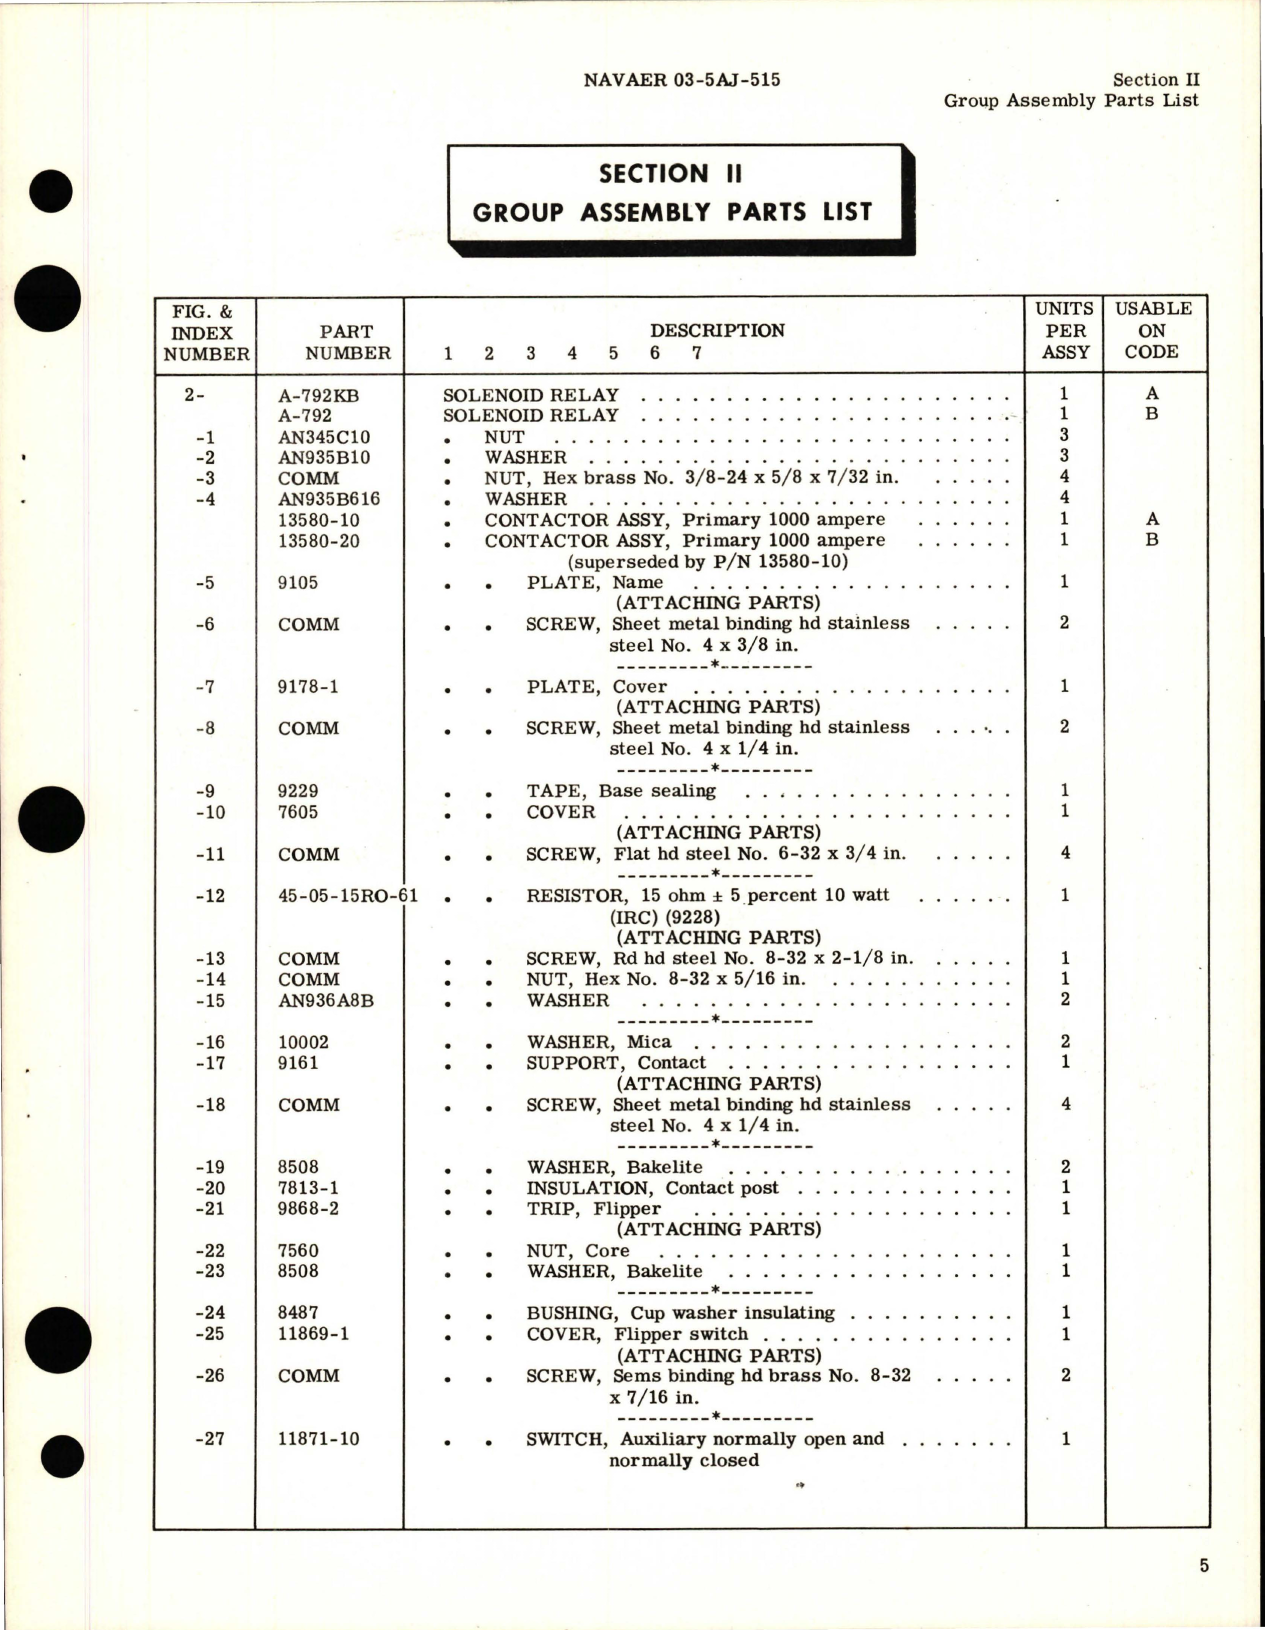 Sample page 7 from AirCorps Library document: Illustrated Parts Breakdown for Solenoid Relay - Part A-792 and A-792KB